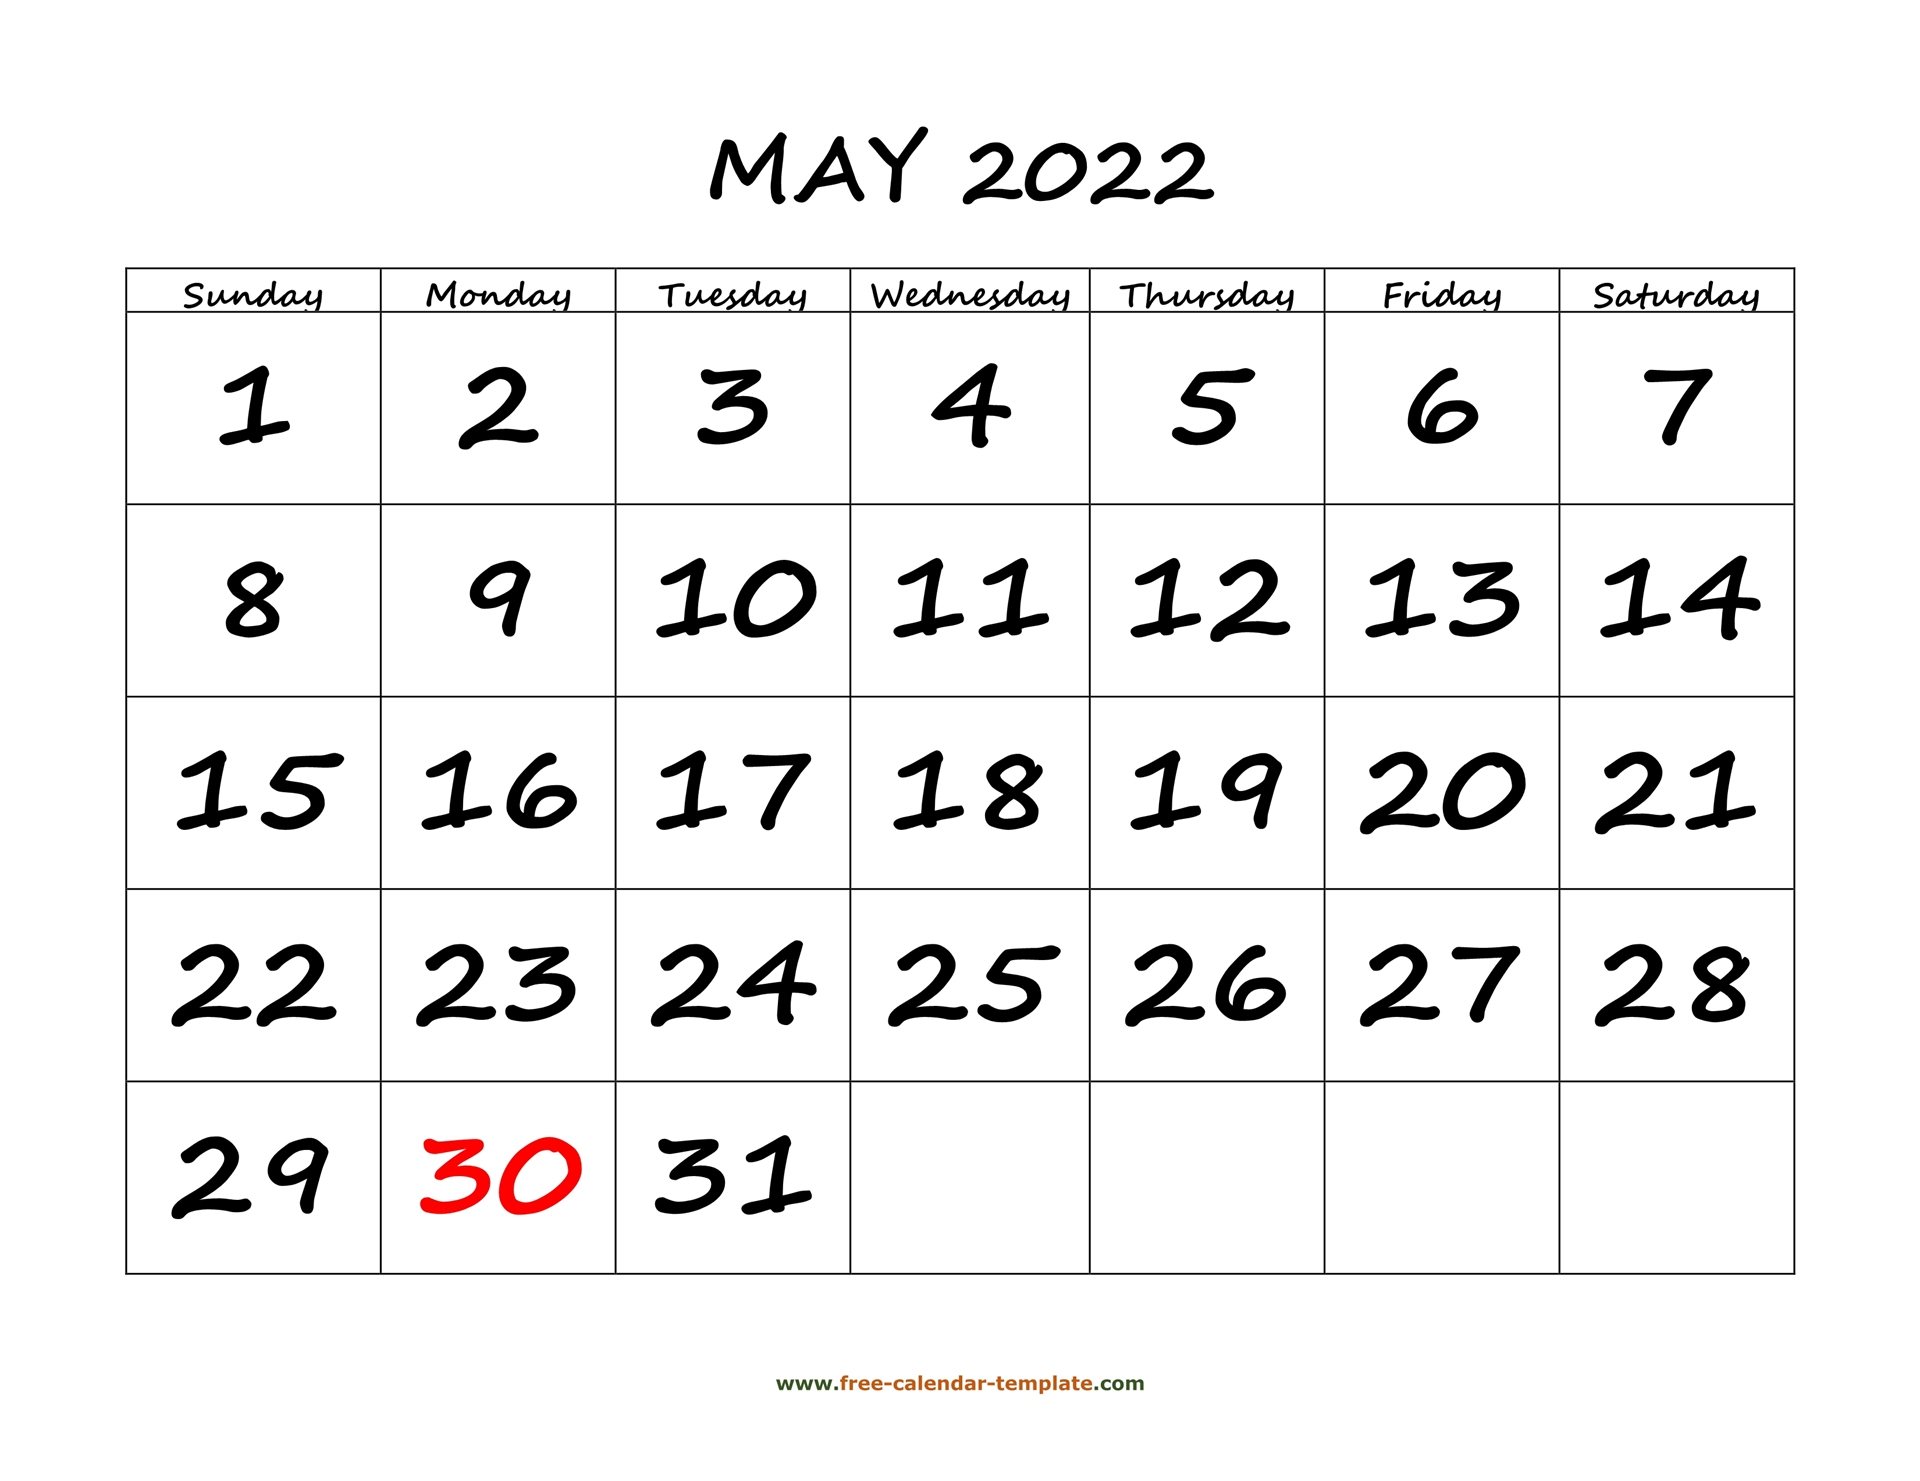 Take Calendar For May 2022 With Holidays